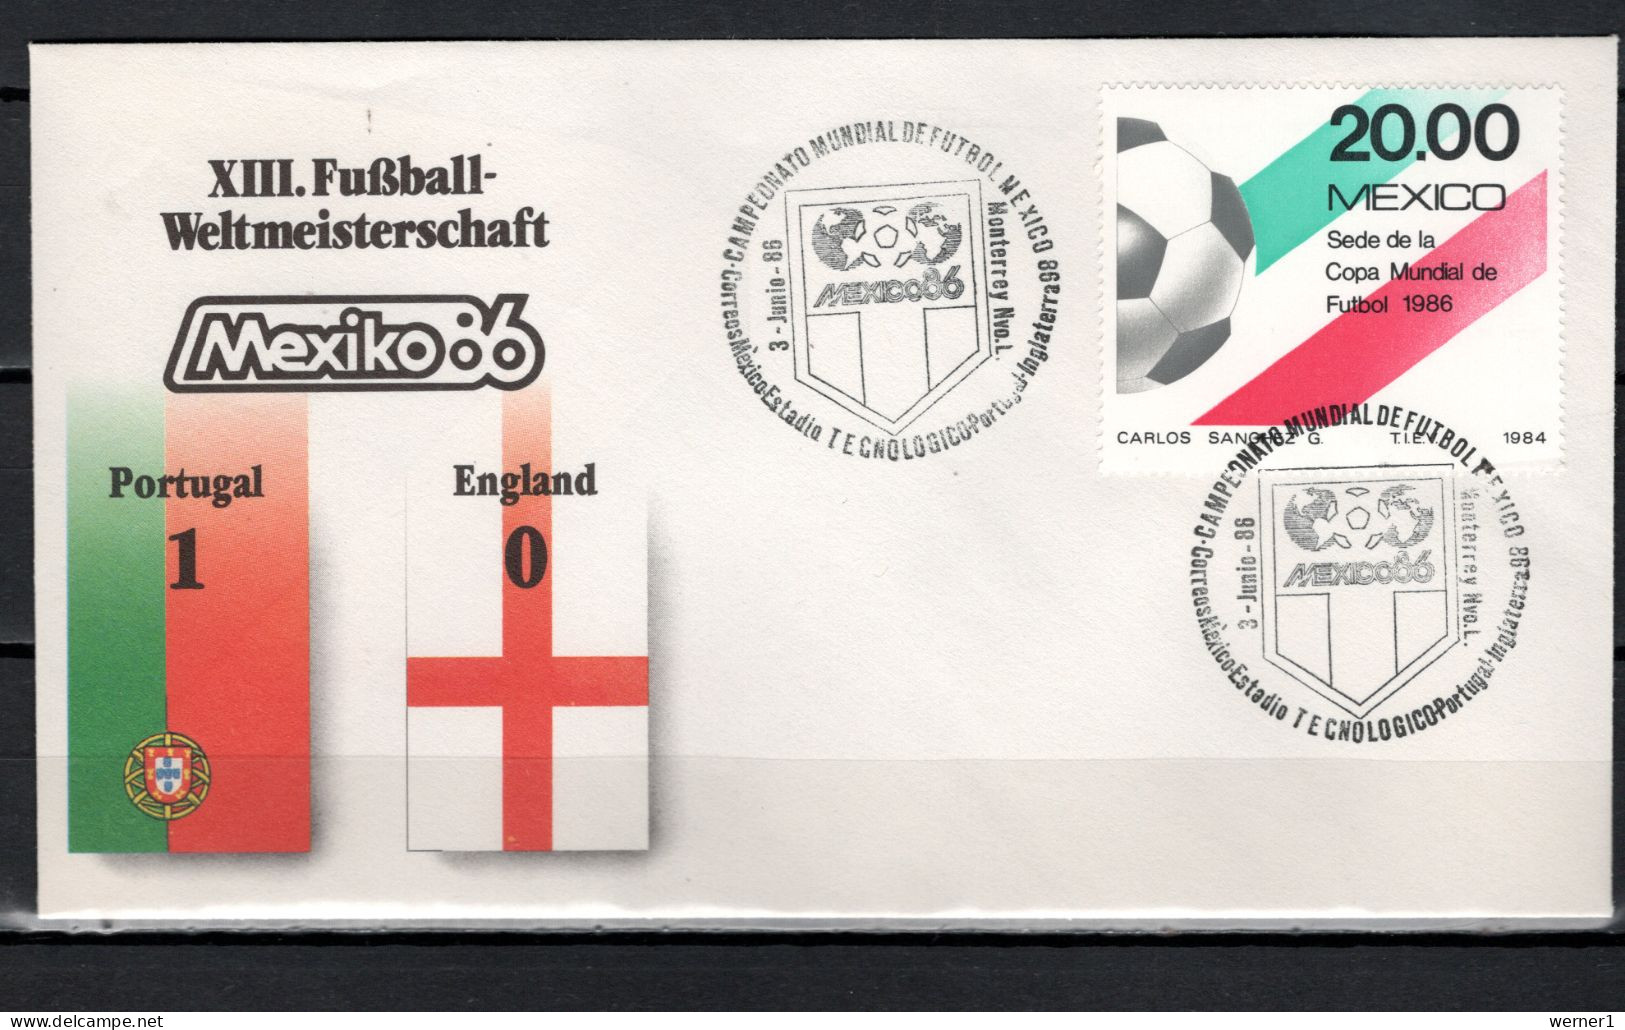 Mexico 1986 Football Soccer World Cup Commemorative Cover Match Portugal - England 1 : 0 - 1986 – Mexiko